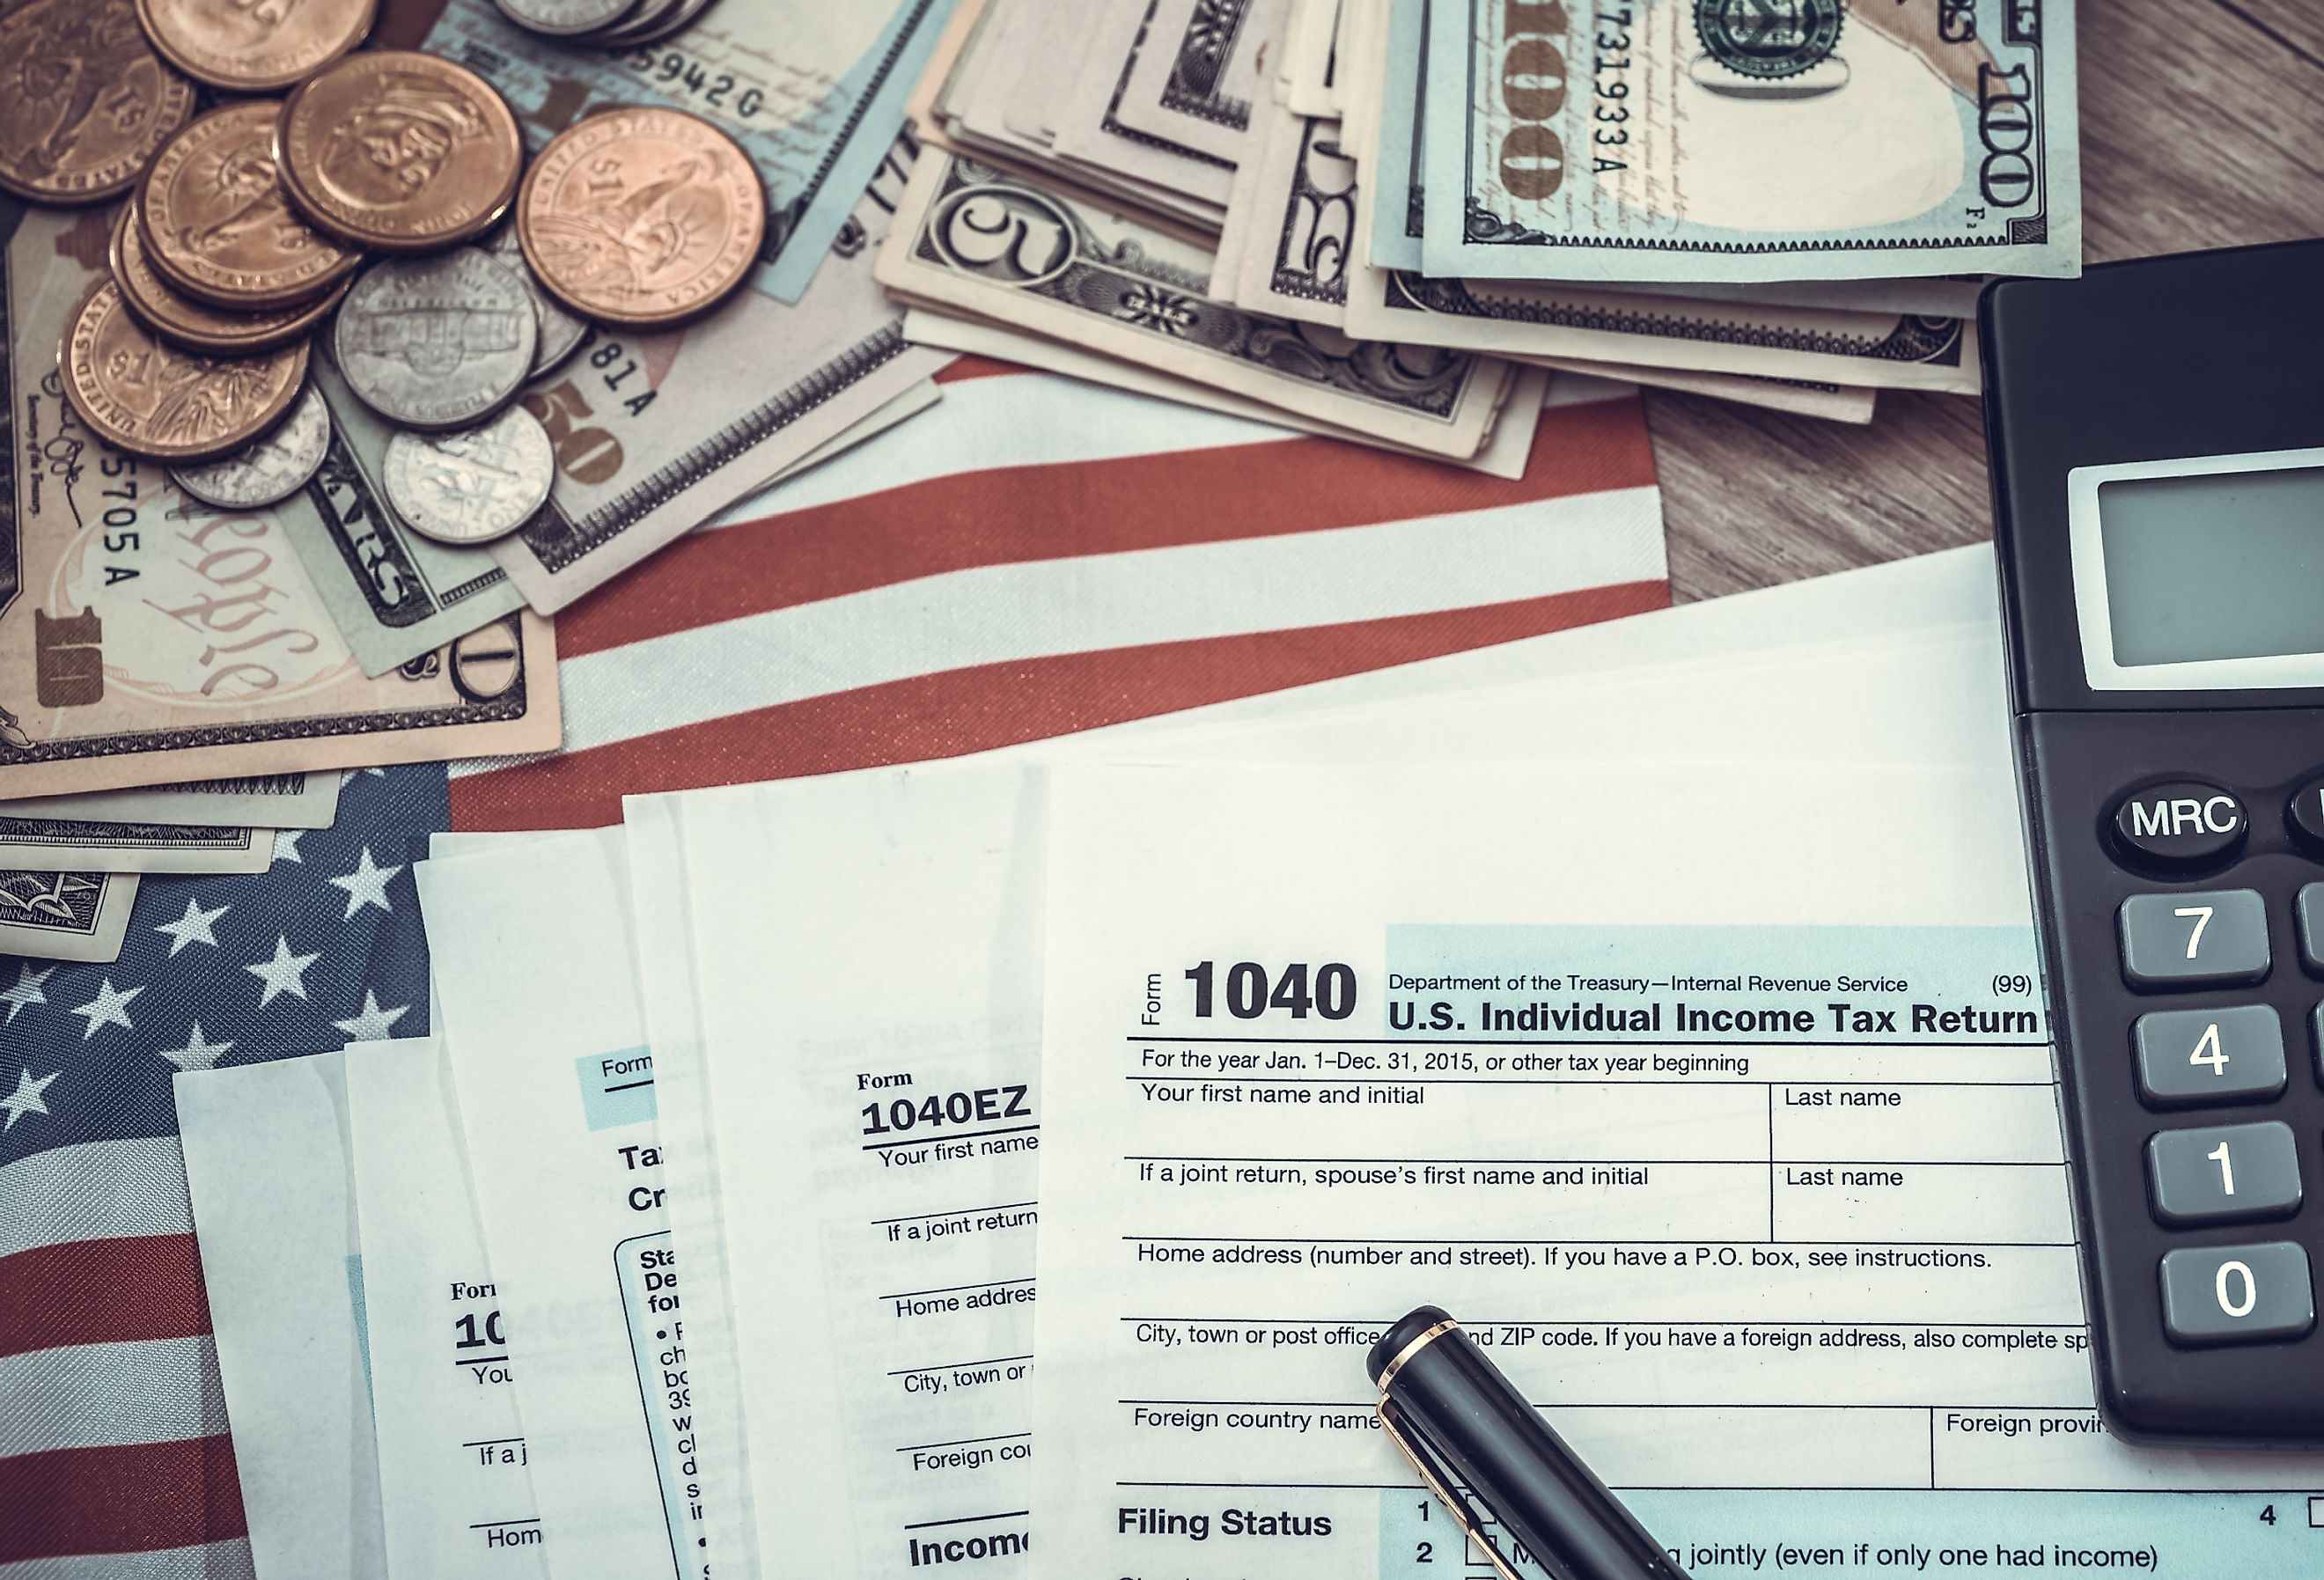 1040 tax form, pen, US money and flag.